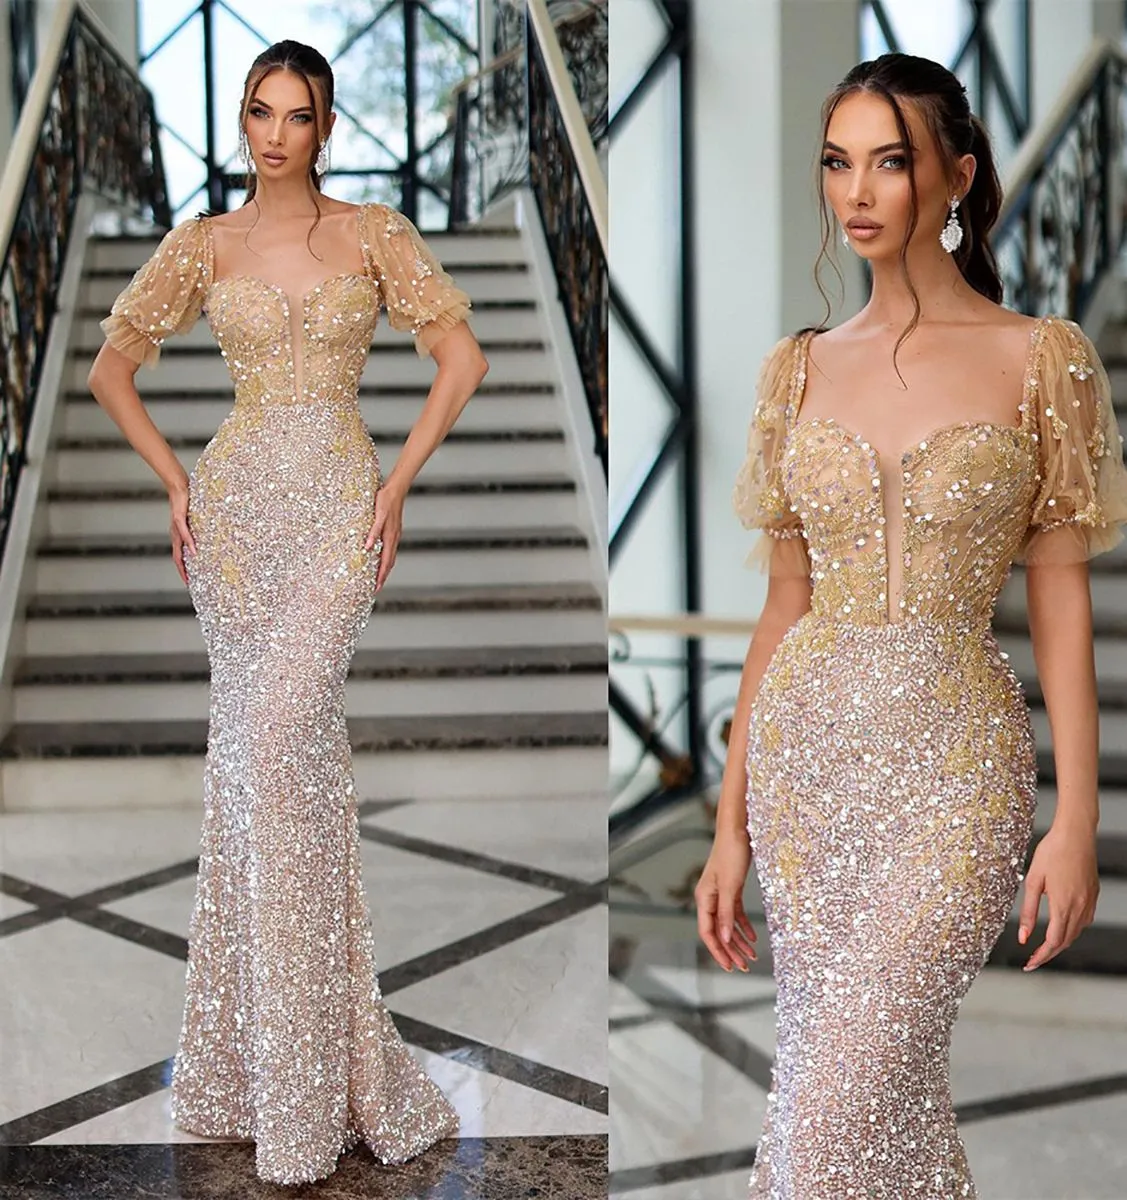 Shiny Champagne Mermaid Prom Dresses Square Collar Short Sleeves Party Dresses Sequined Beaded Custom Made Evening Dress